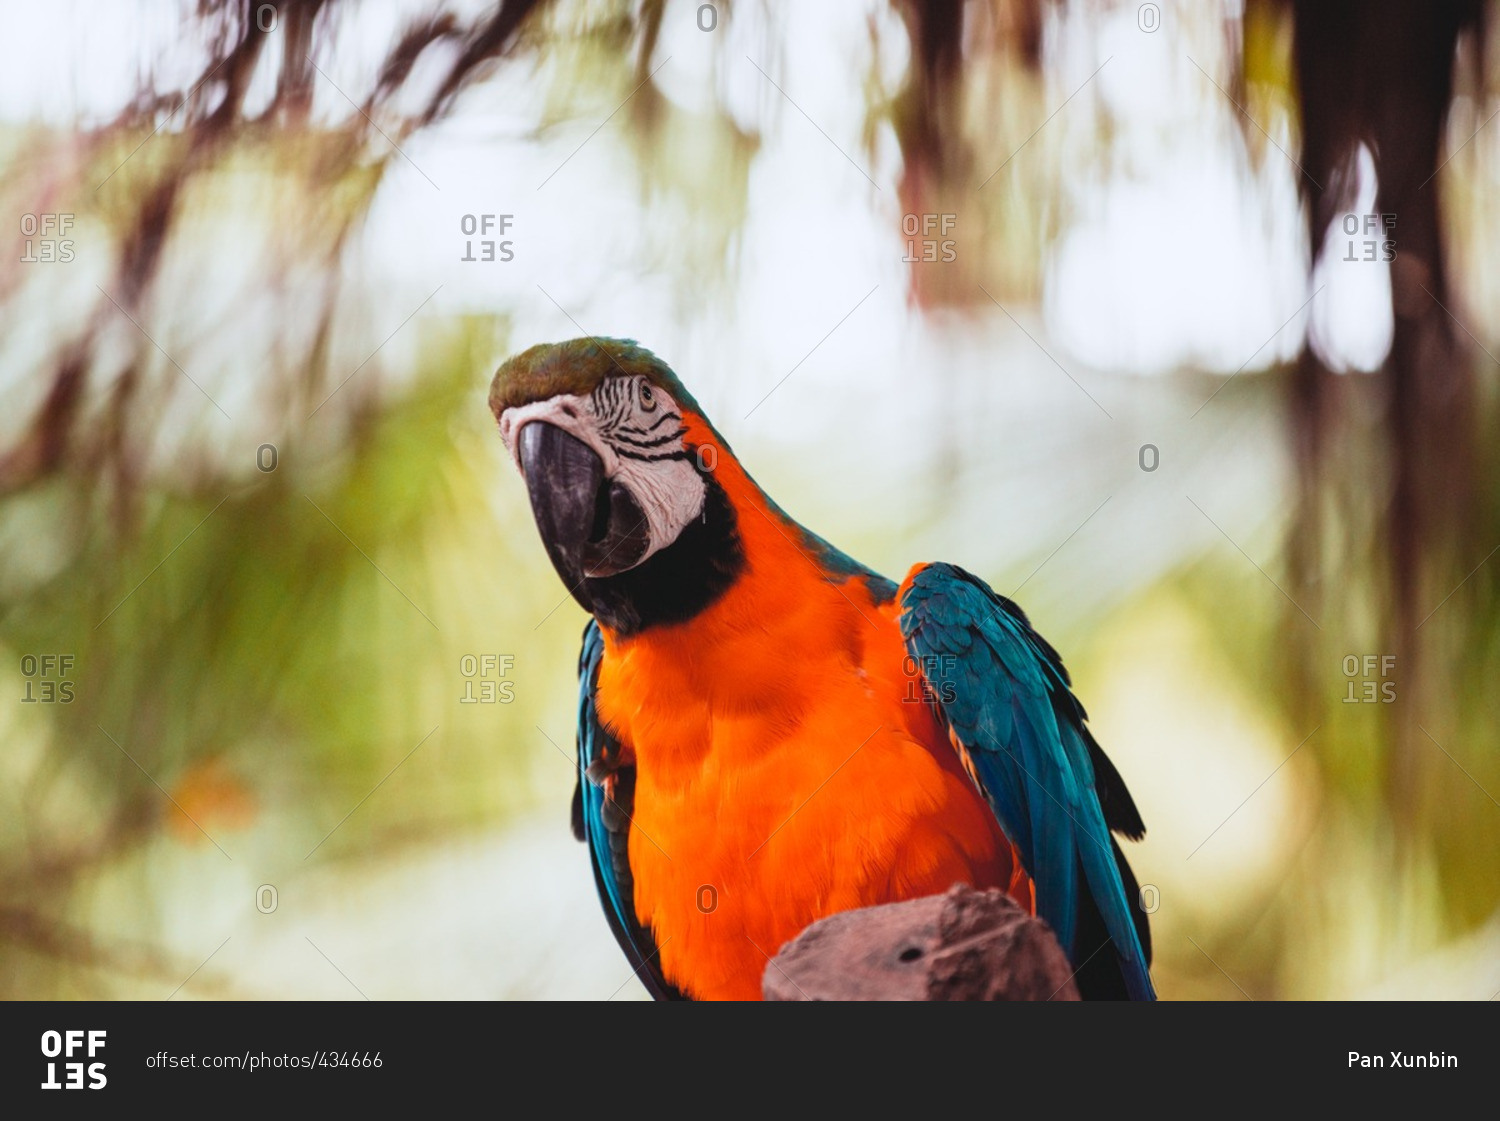 Colorful plumage of a scarlet macaw on branch